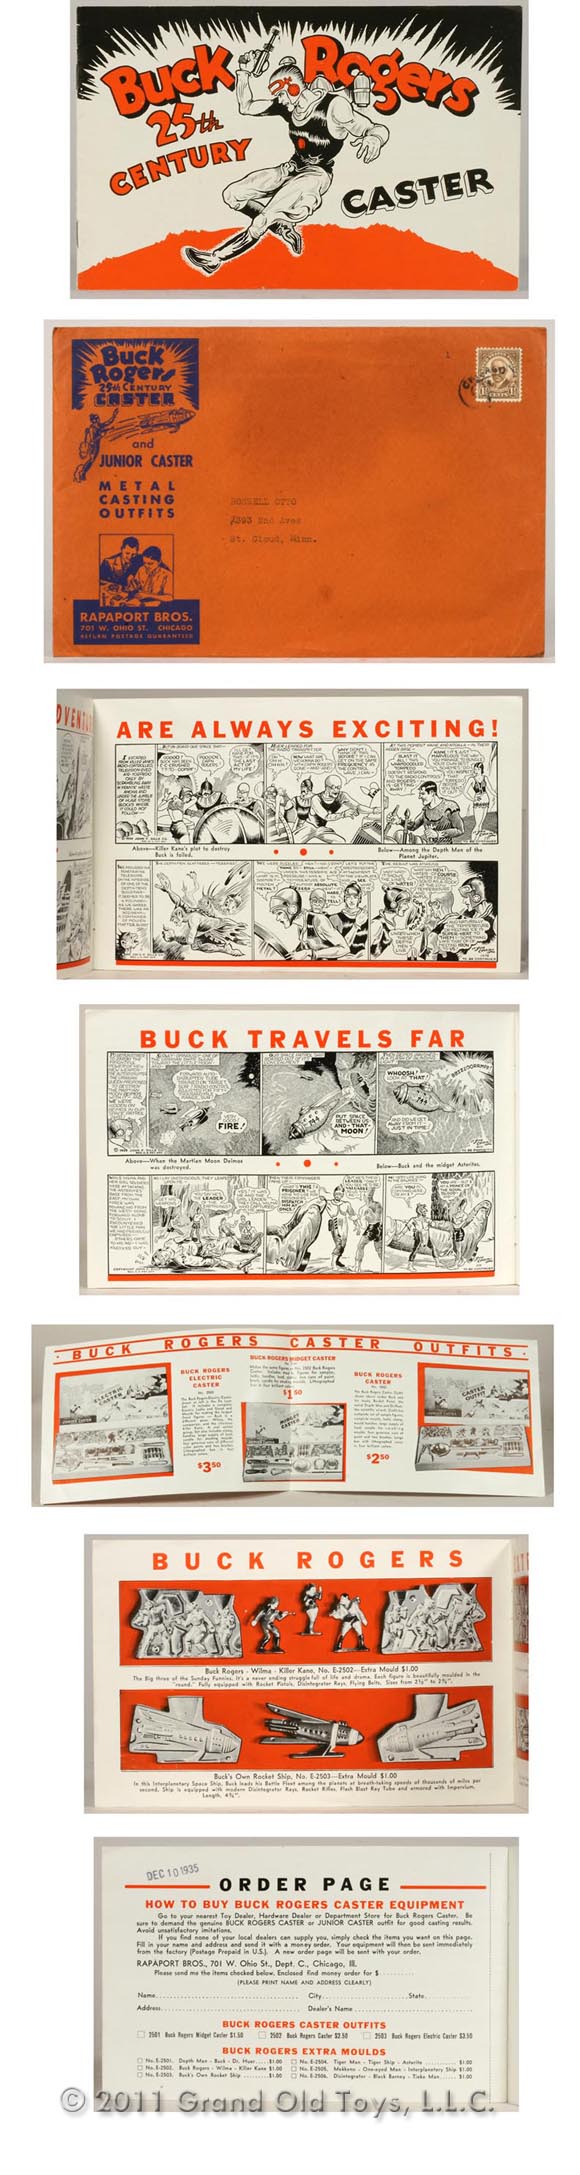 1935 Buck Rogers Caster Catalogs with Original Illustrated Envelope